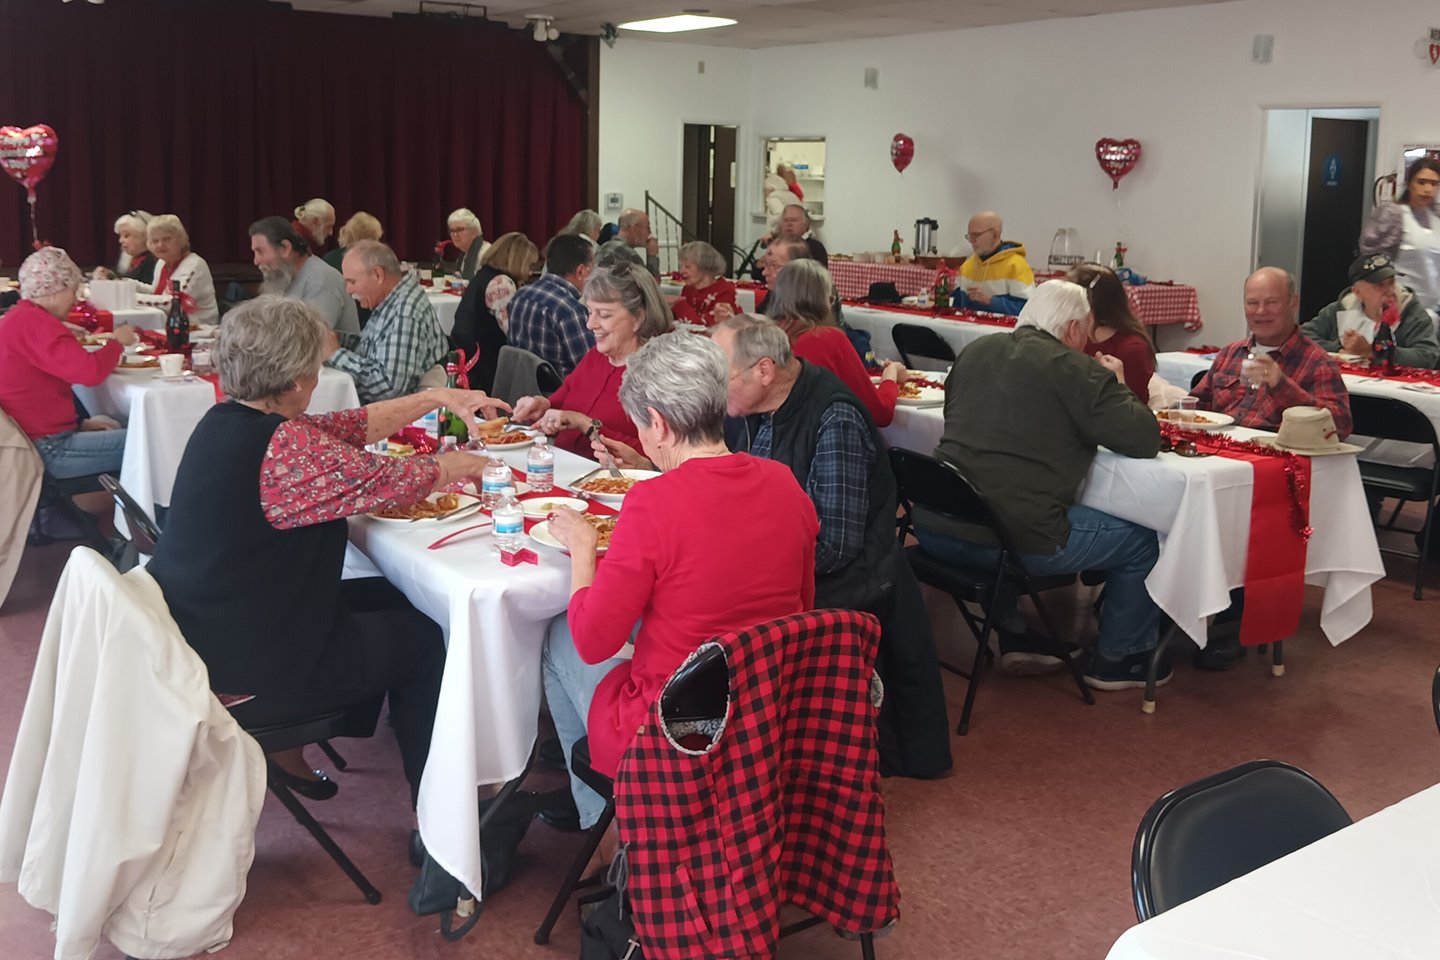 PHOTO CREDIT:  Michelle Hannon-Tri-Community NewsPlus

Wrightwood Seniors enjoy a delicious breakfast and are excited to see what the St. Patrick's Day gathering has in store for them.